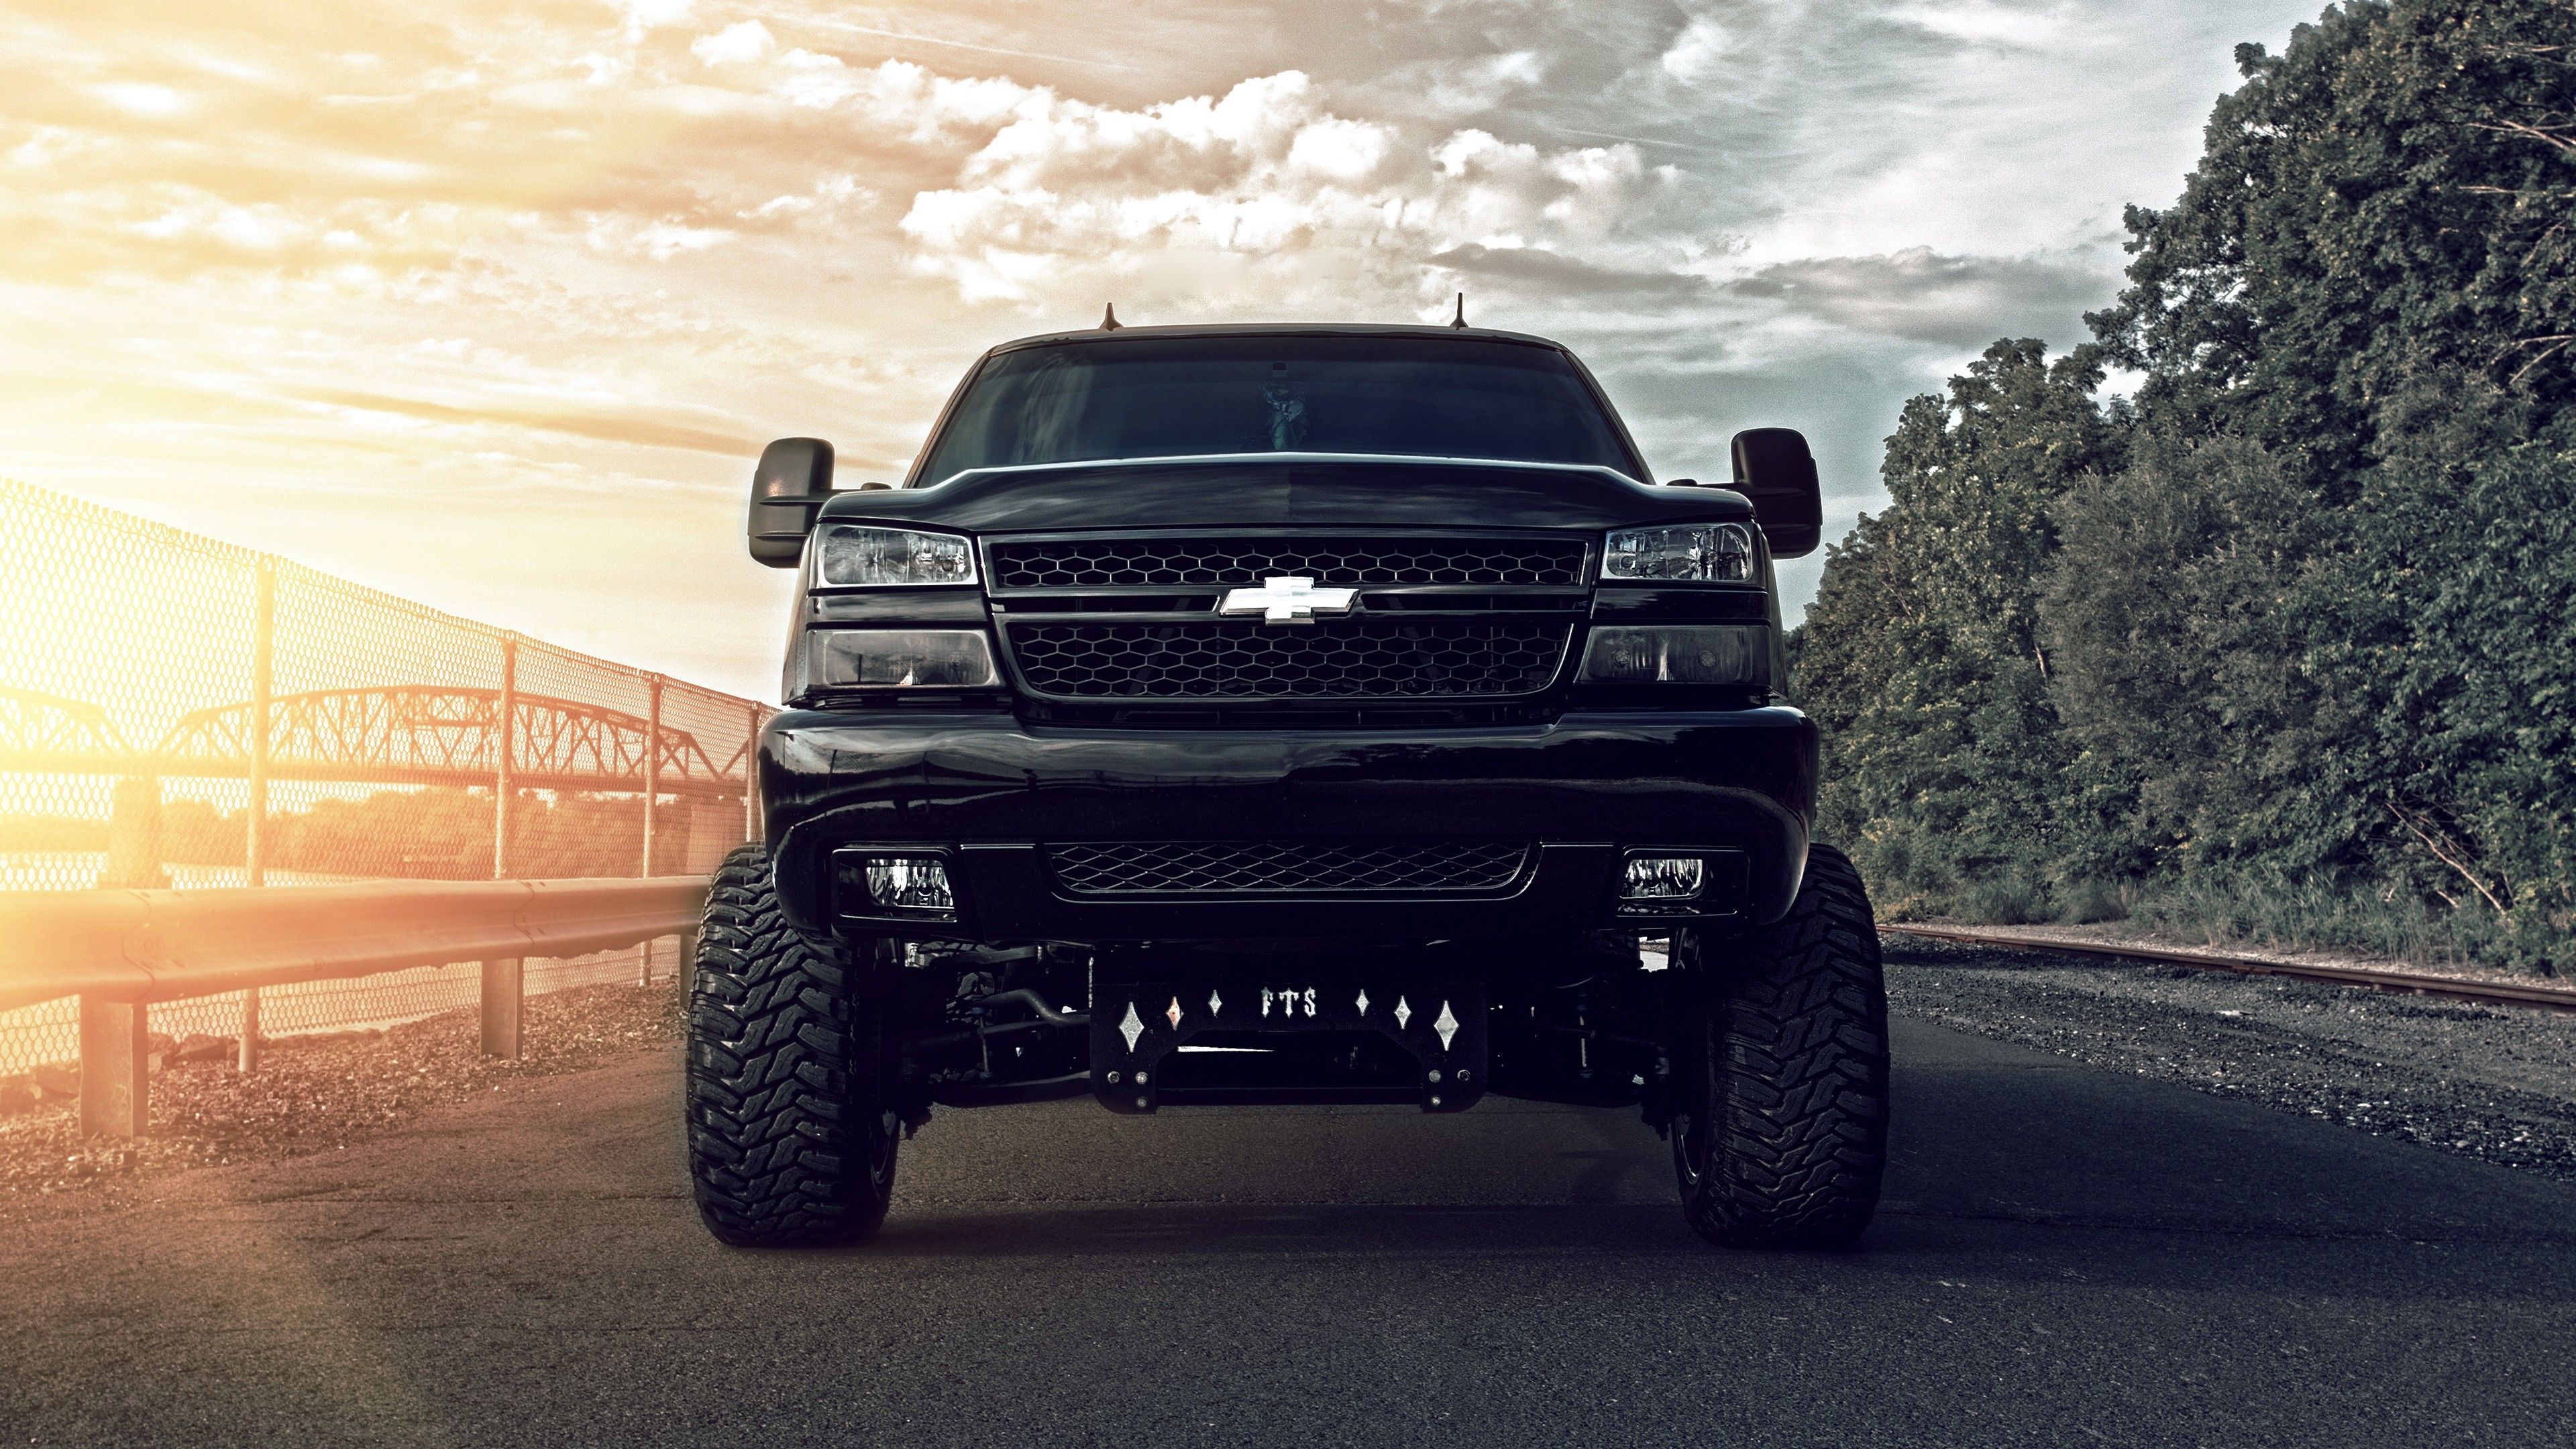 Chevy Truck Wallpapers 4k Hd Chevy Truck Backgrounds On Wallpaperbat